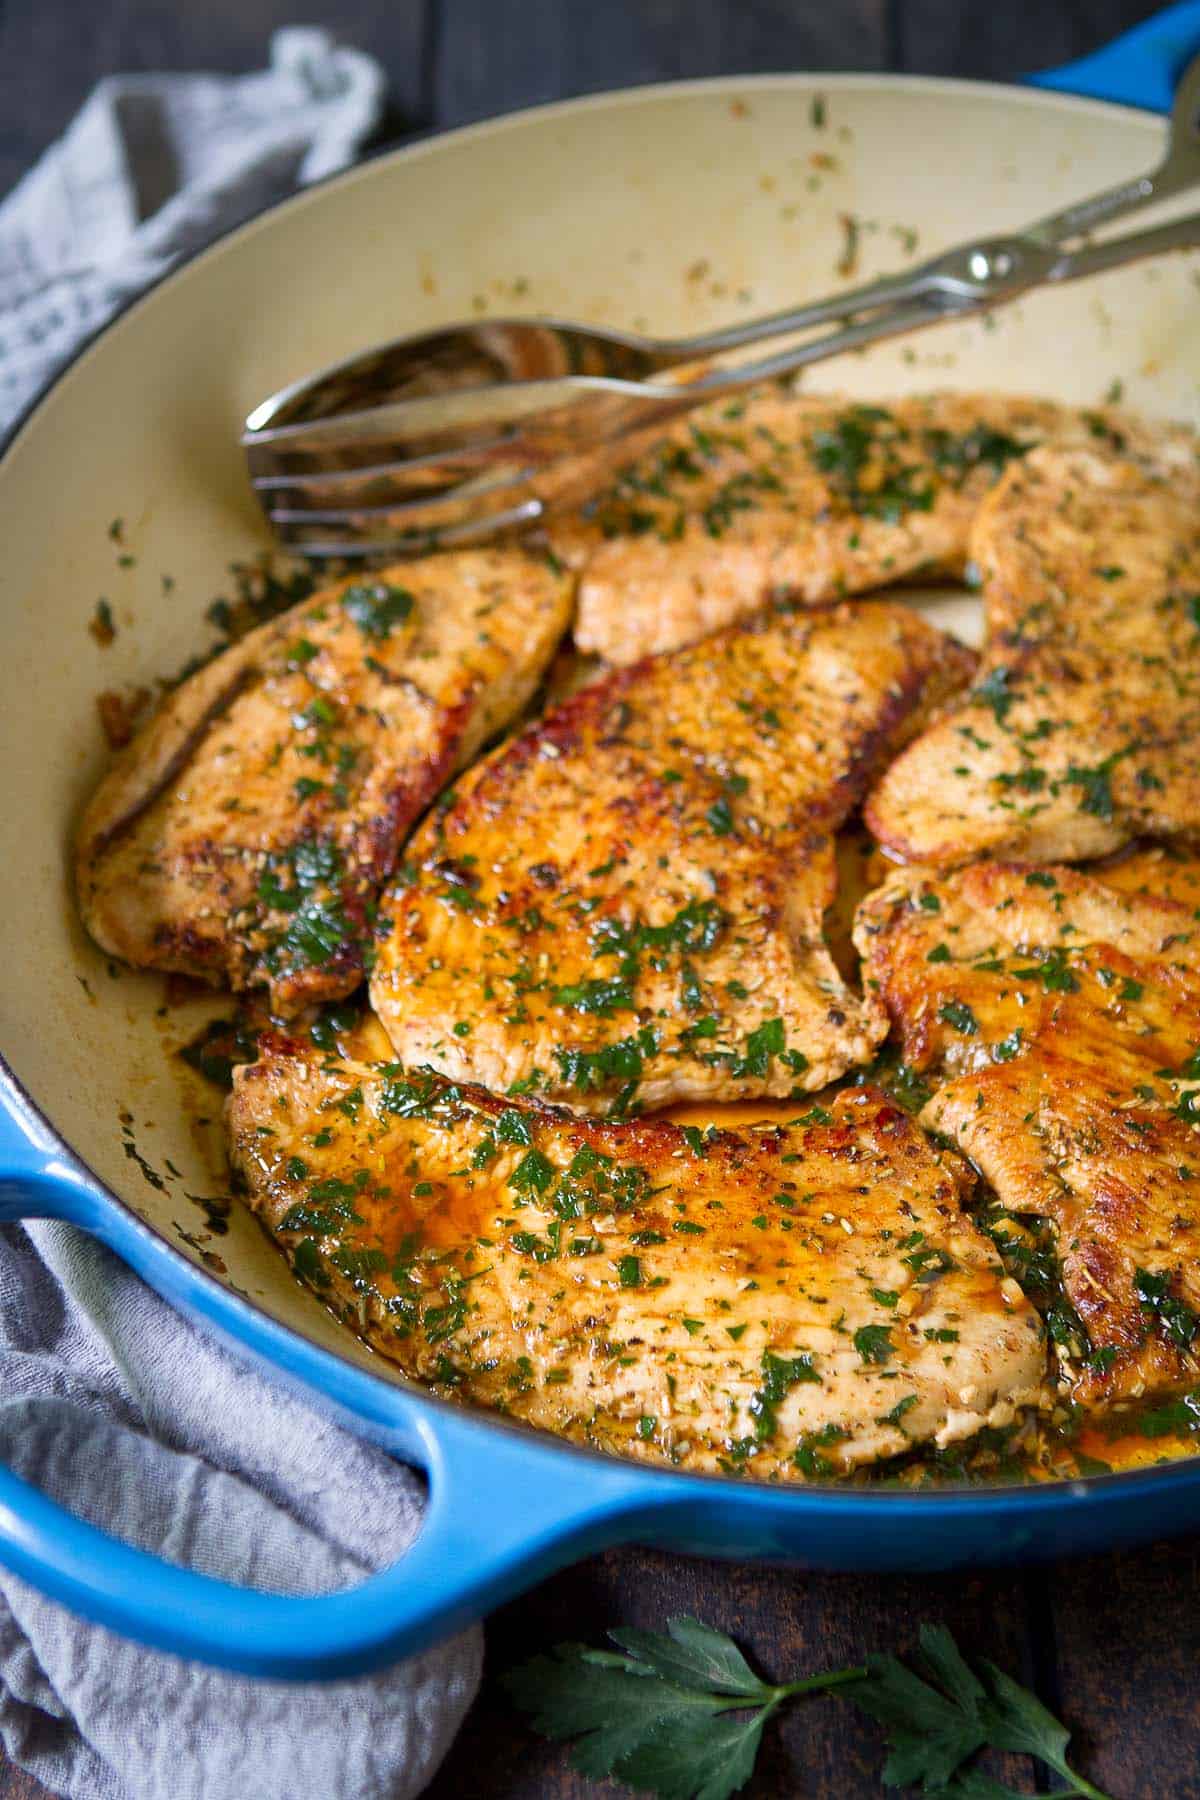 Cooked poultry fillets with wine sauce in a large skillet.